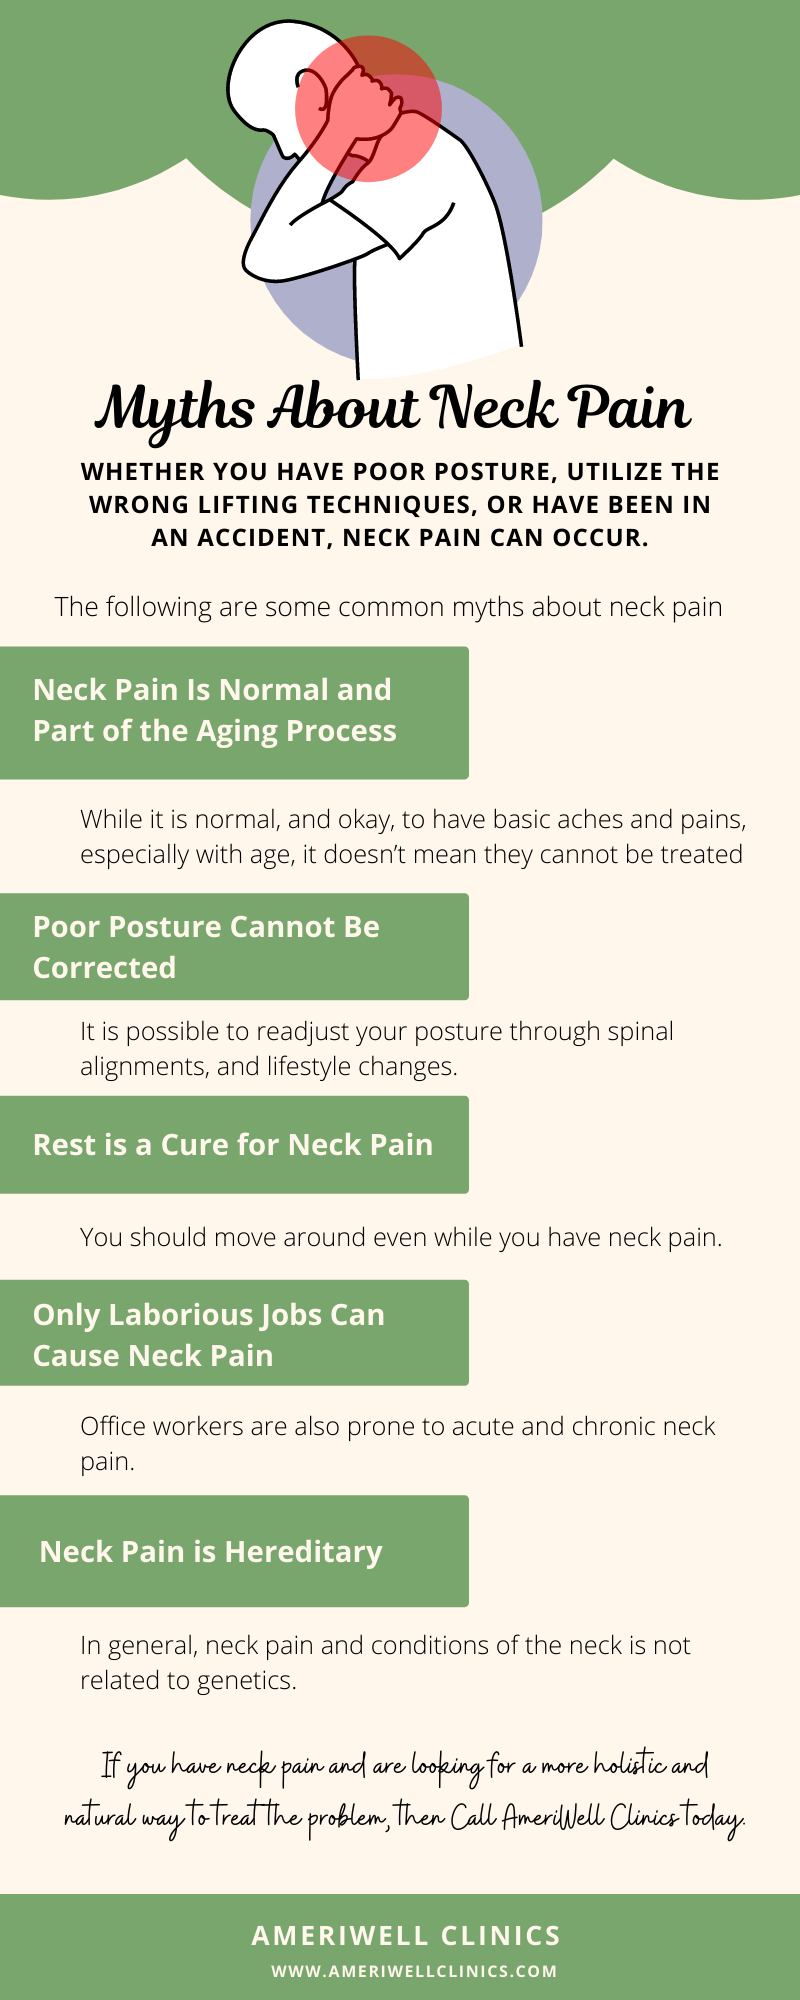 Myths About Neck Pain Infographic